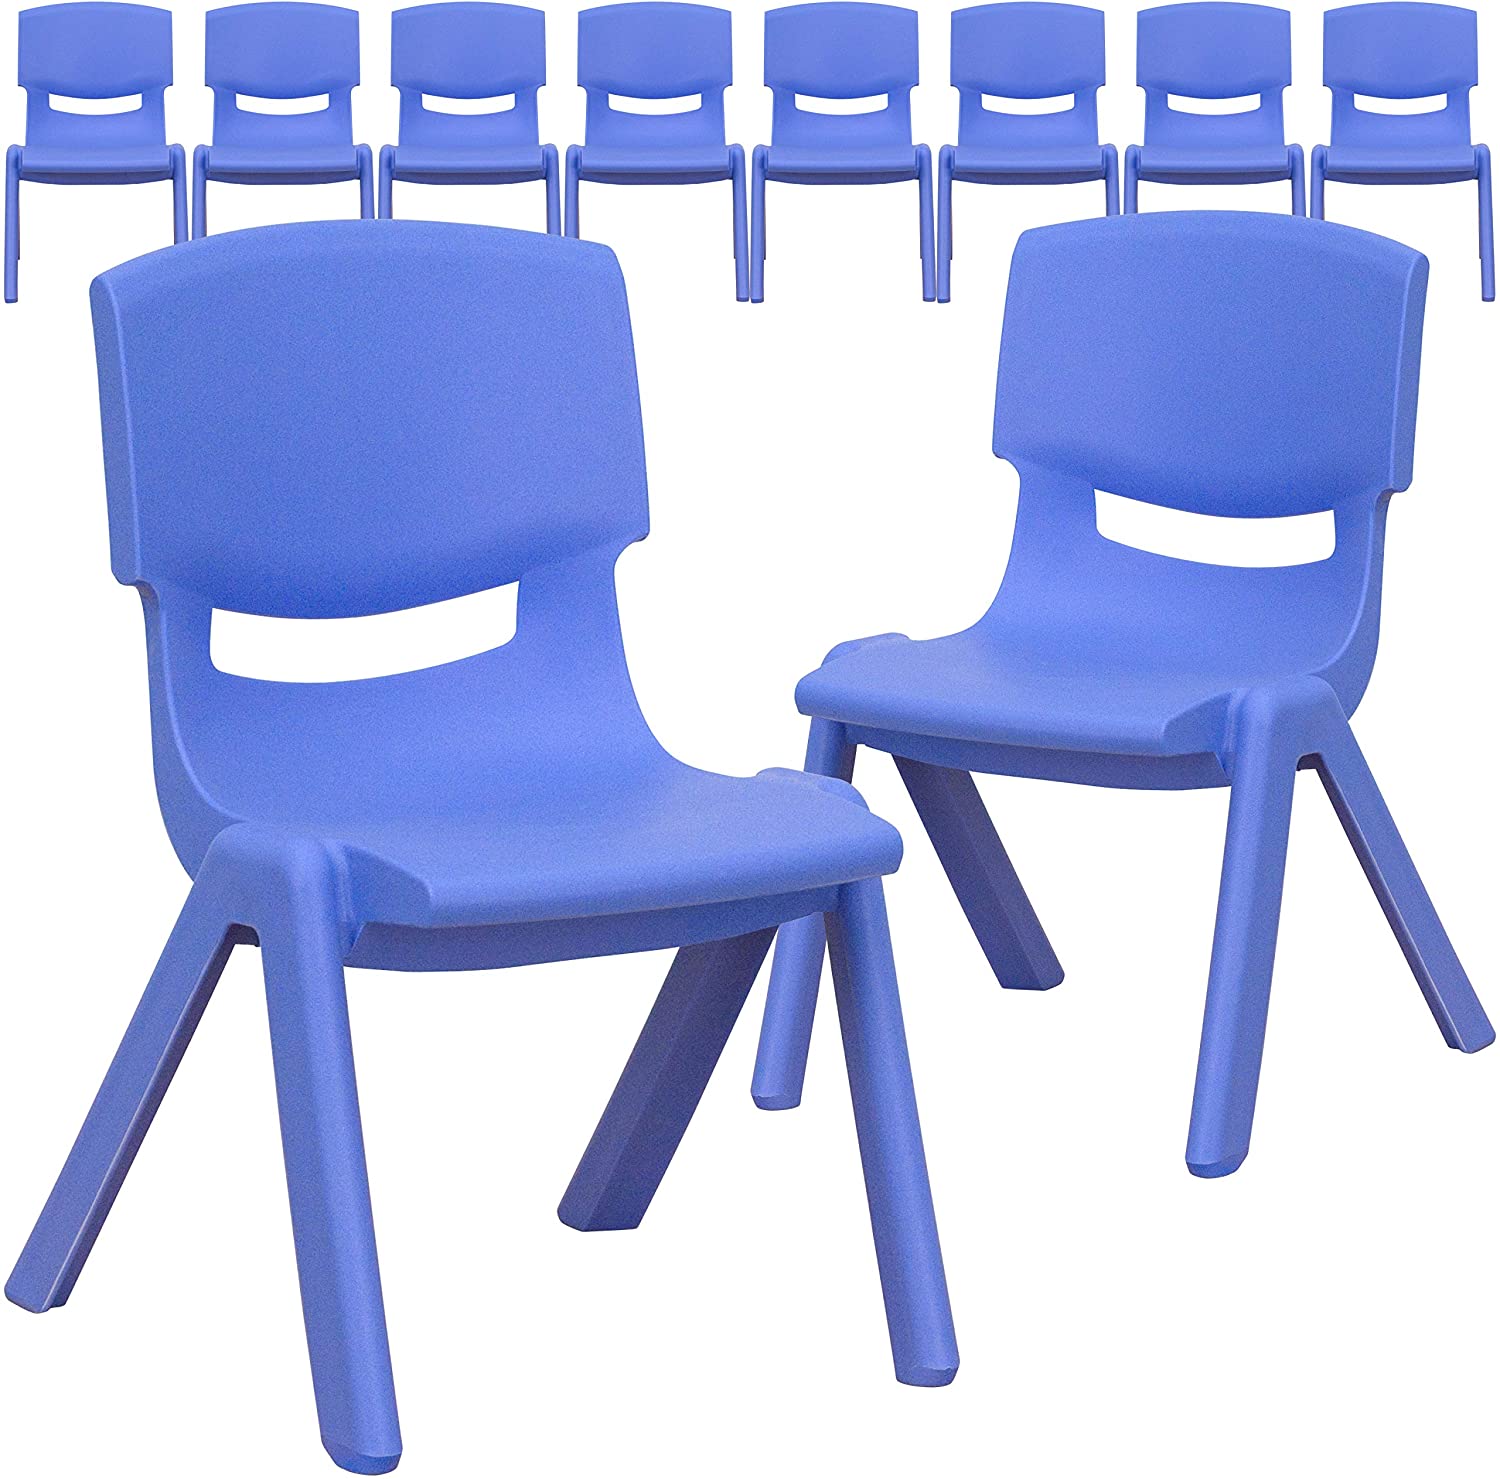 Flash Furniture 4 Pack Blue Plastic Stackable School Chair with 10.5 Seat Height